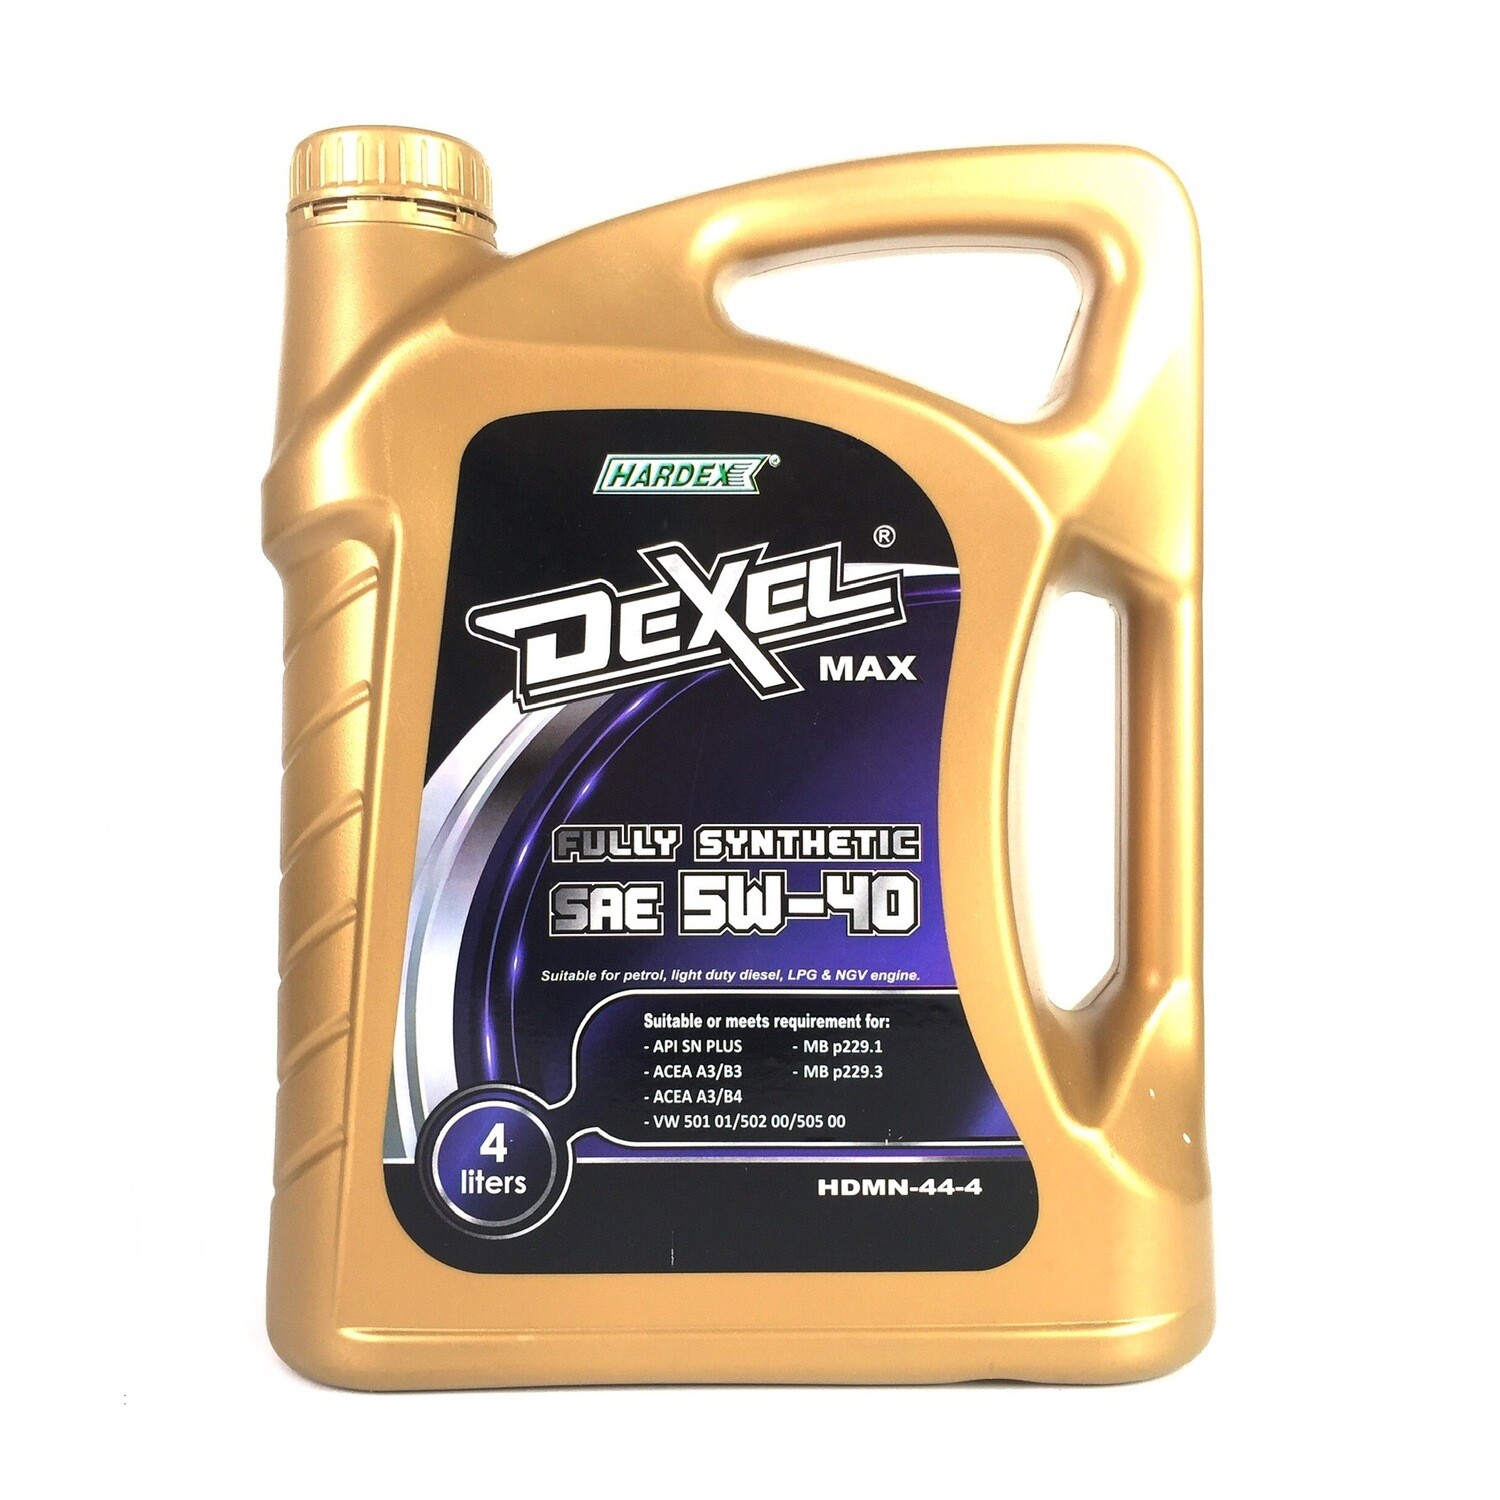 HARDEX Dexel Max SAE 5W-40 Fully Synthetic Gasoline and Diesel Engine Oil